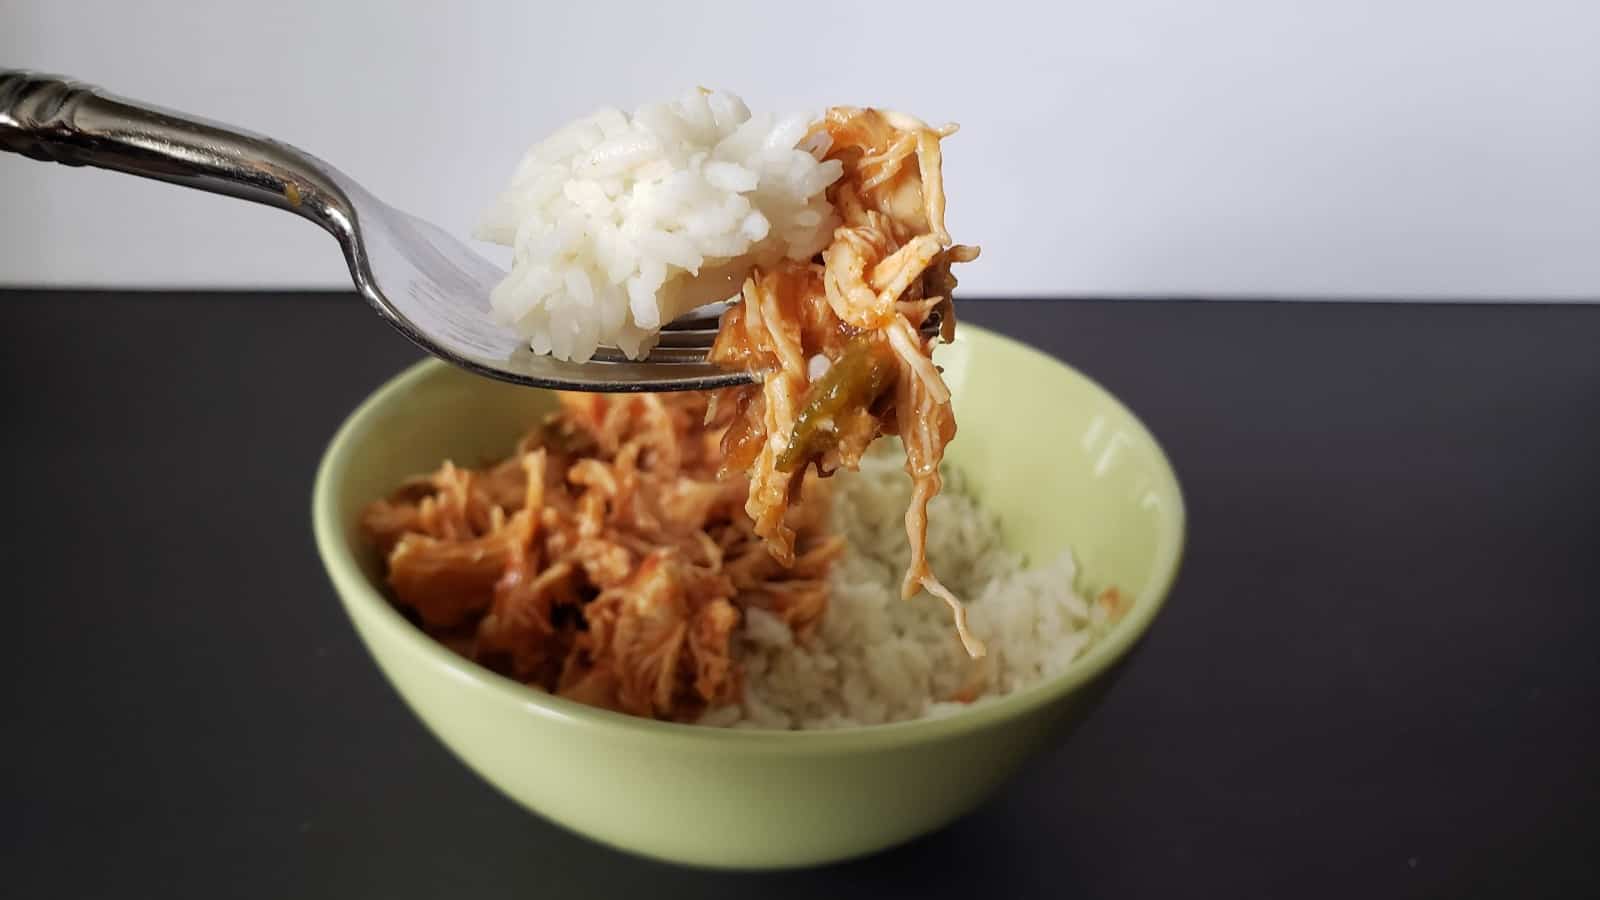 Image shows a Bite of tomato lime chicken on a fork with rice and the rest of the bowl in the background.